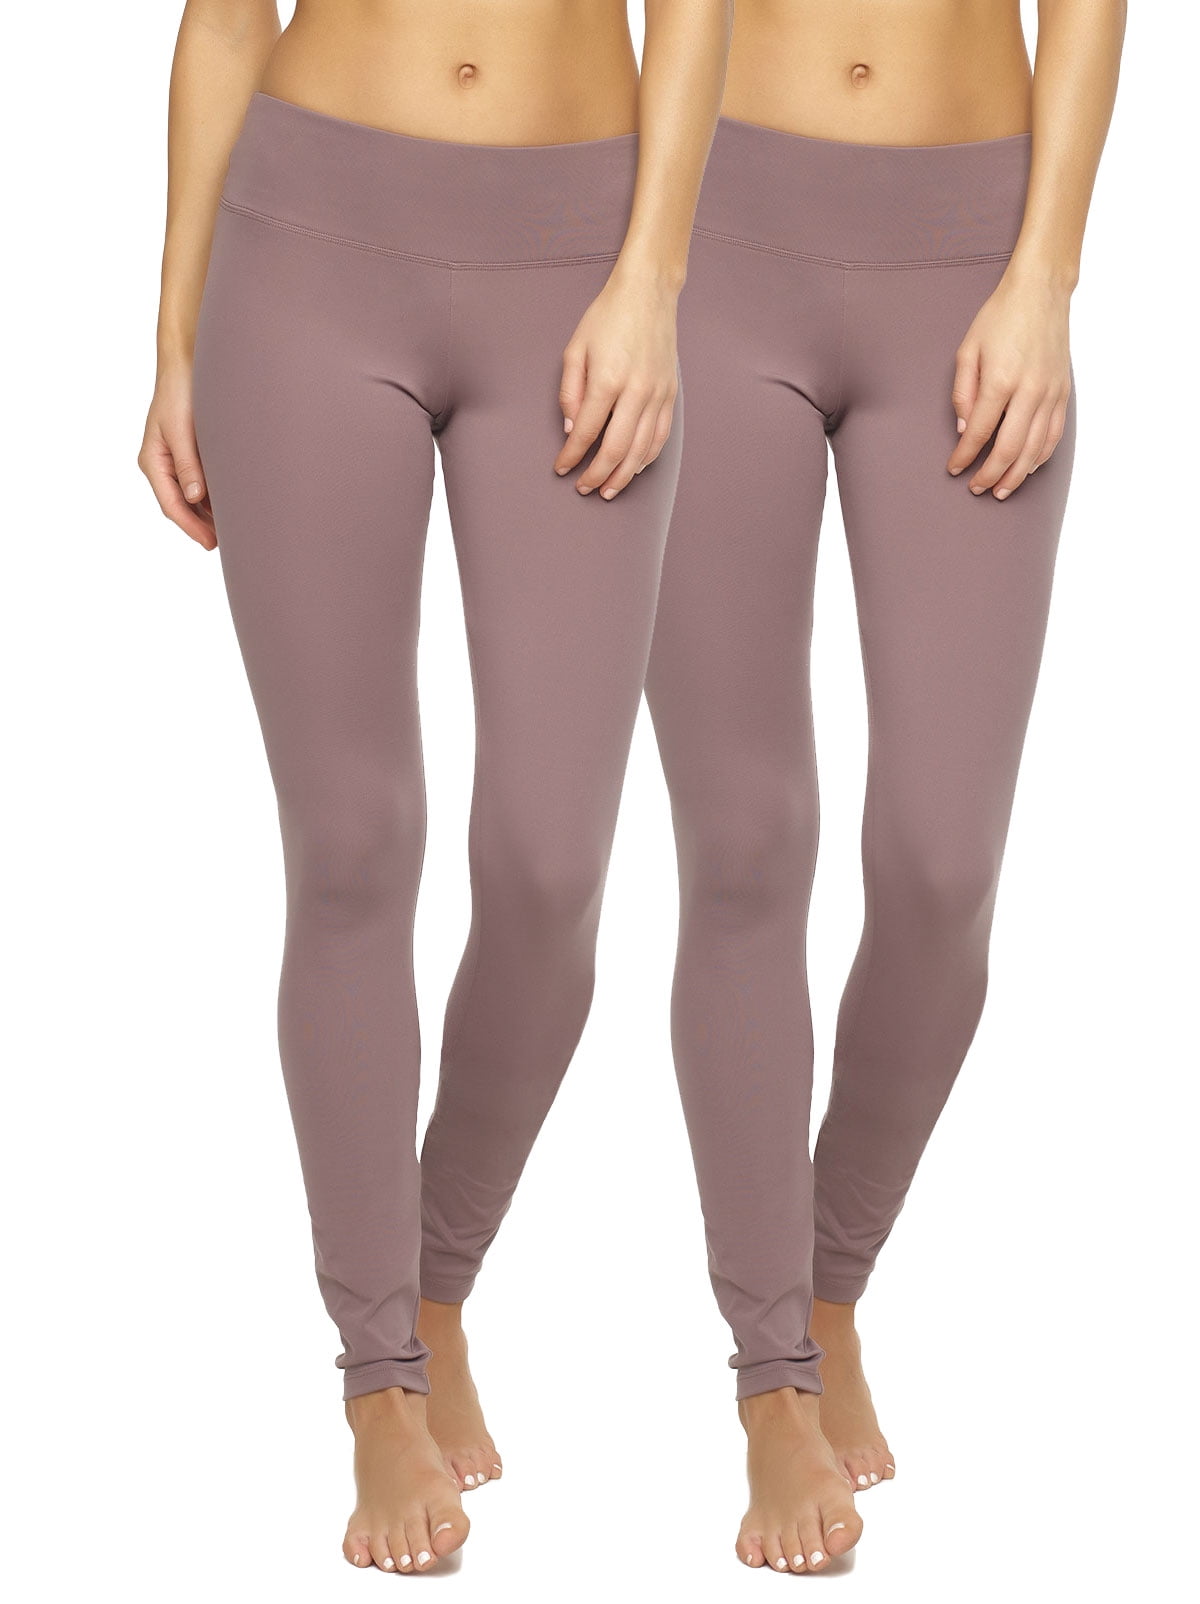 Felina Sueded Athleisure Performance Legging (2-Pack) Womens Leggings  w/Slimming Waist Band Style: C3690RT (Large, Sparrow)